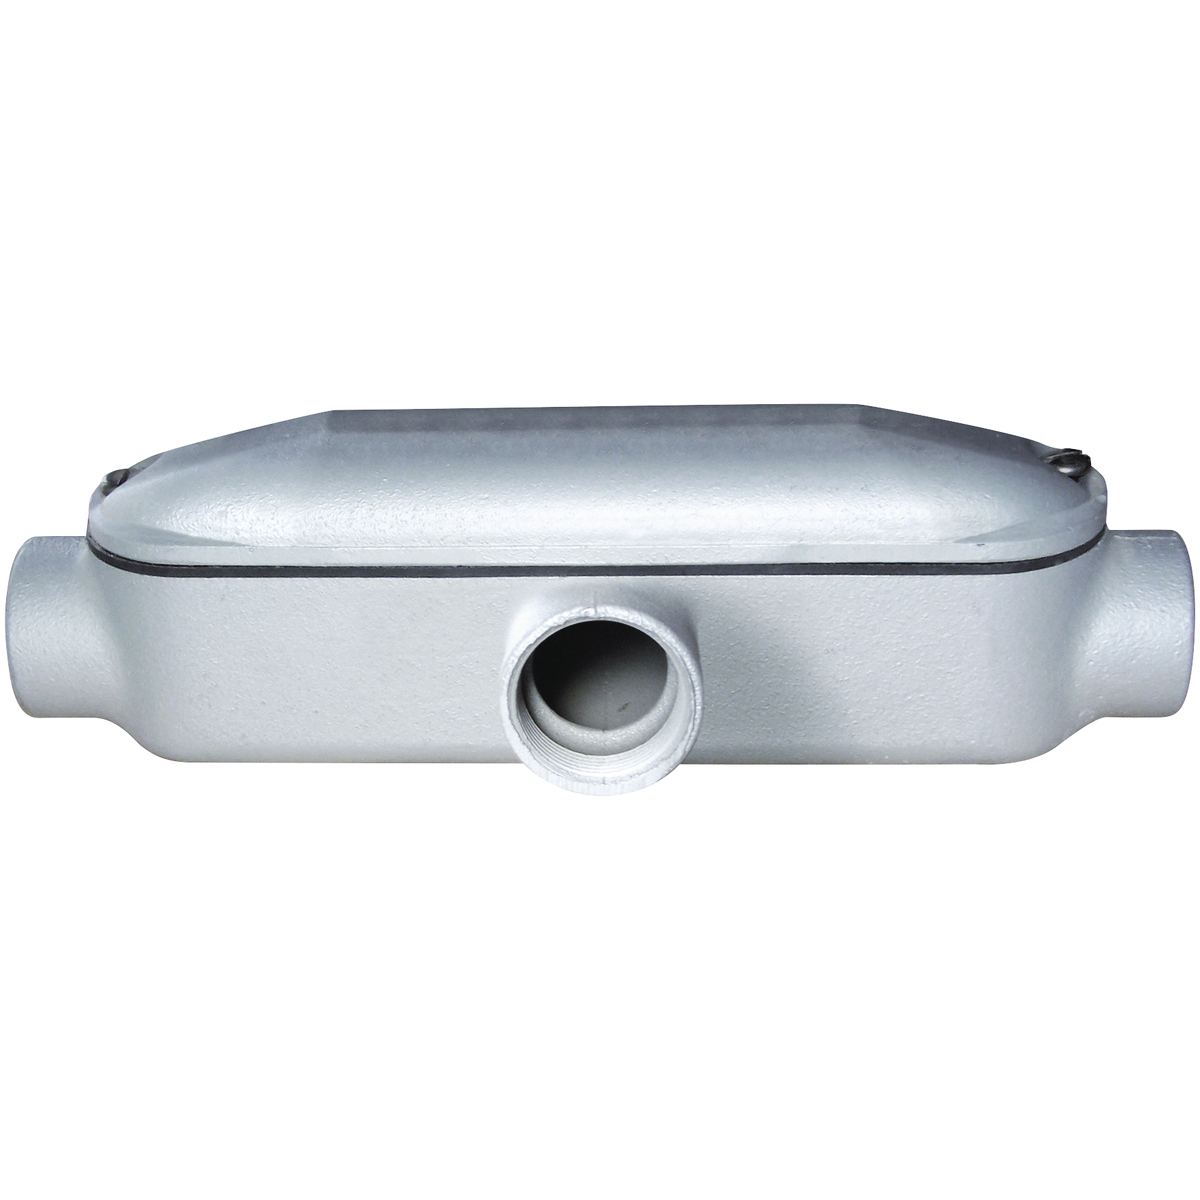 MO SERIES - ALUMINUM MOGUL CONDUIT BODY WITH COVER AND GASKET - T TYPE-HUB SIZE 3-1/2 INCH - VOLUME 976.0 CUBIC INCHES